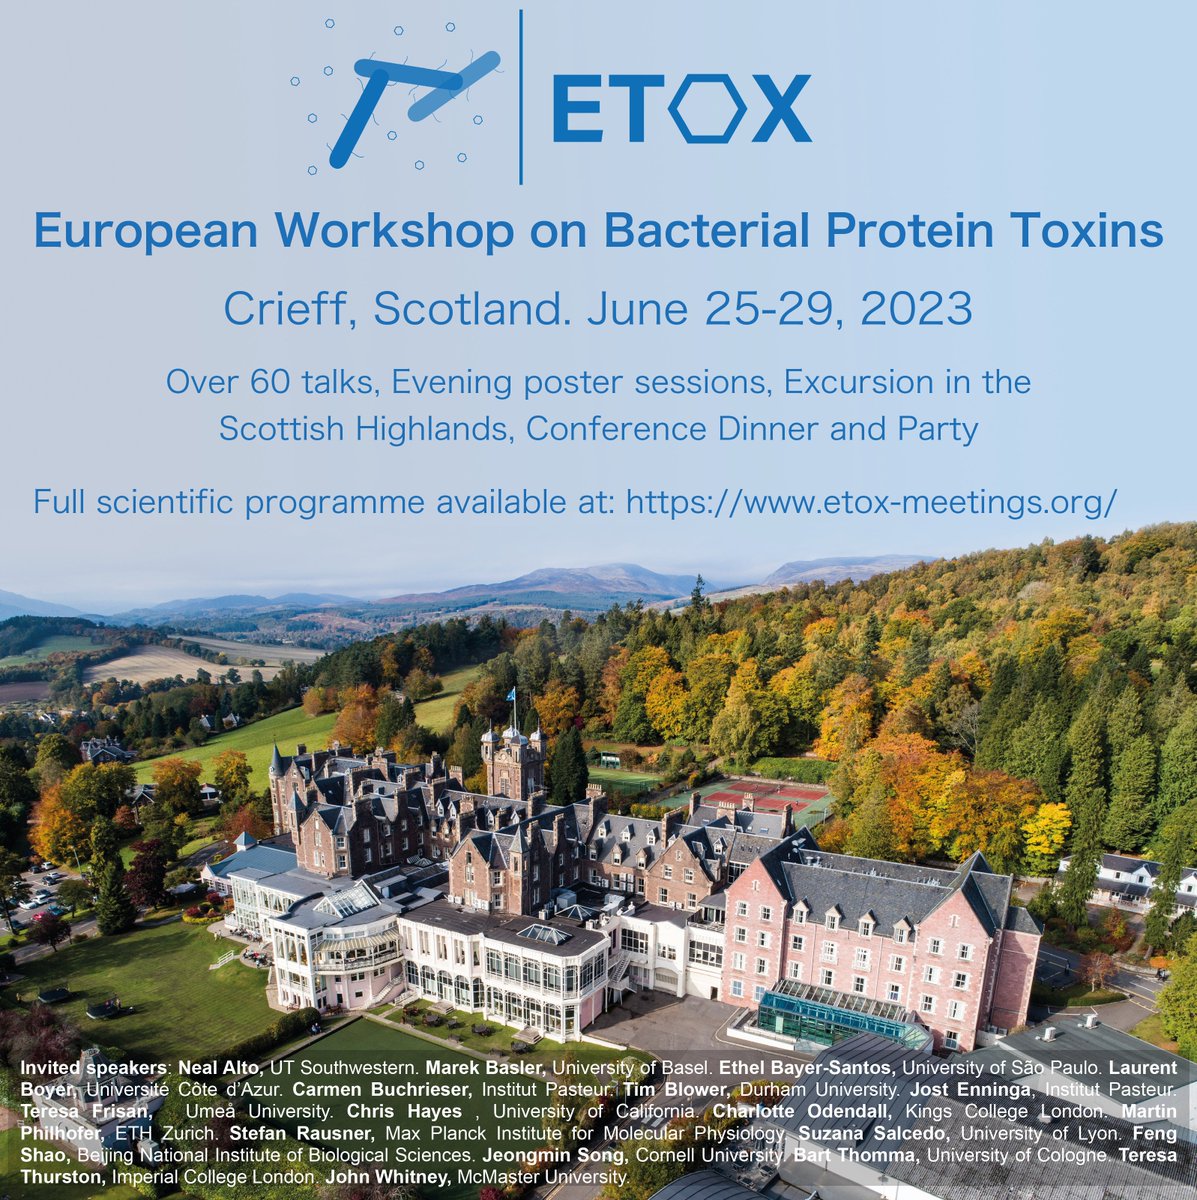 Molecular Microbiology are happy to announce that we will be sponsoring the upcoming #ETOX2023 conference! We cant wait to see all the amazing research that will be on display, watch this space! 🦠#bactria #toxins For more info on this exciting conference: etox-meetings.org